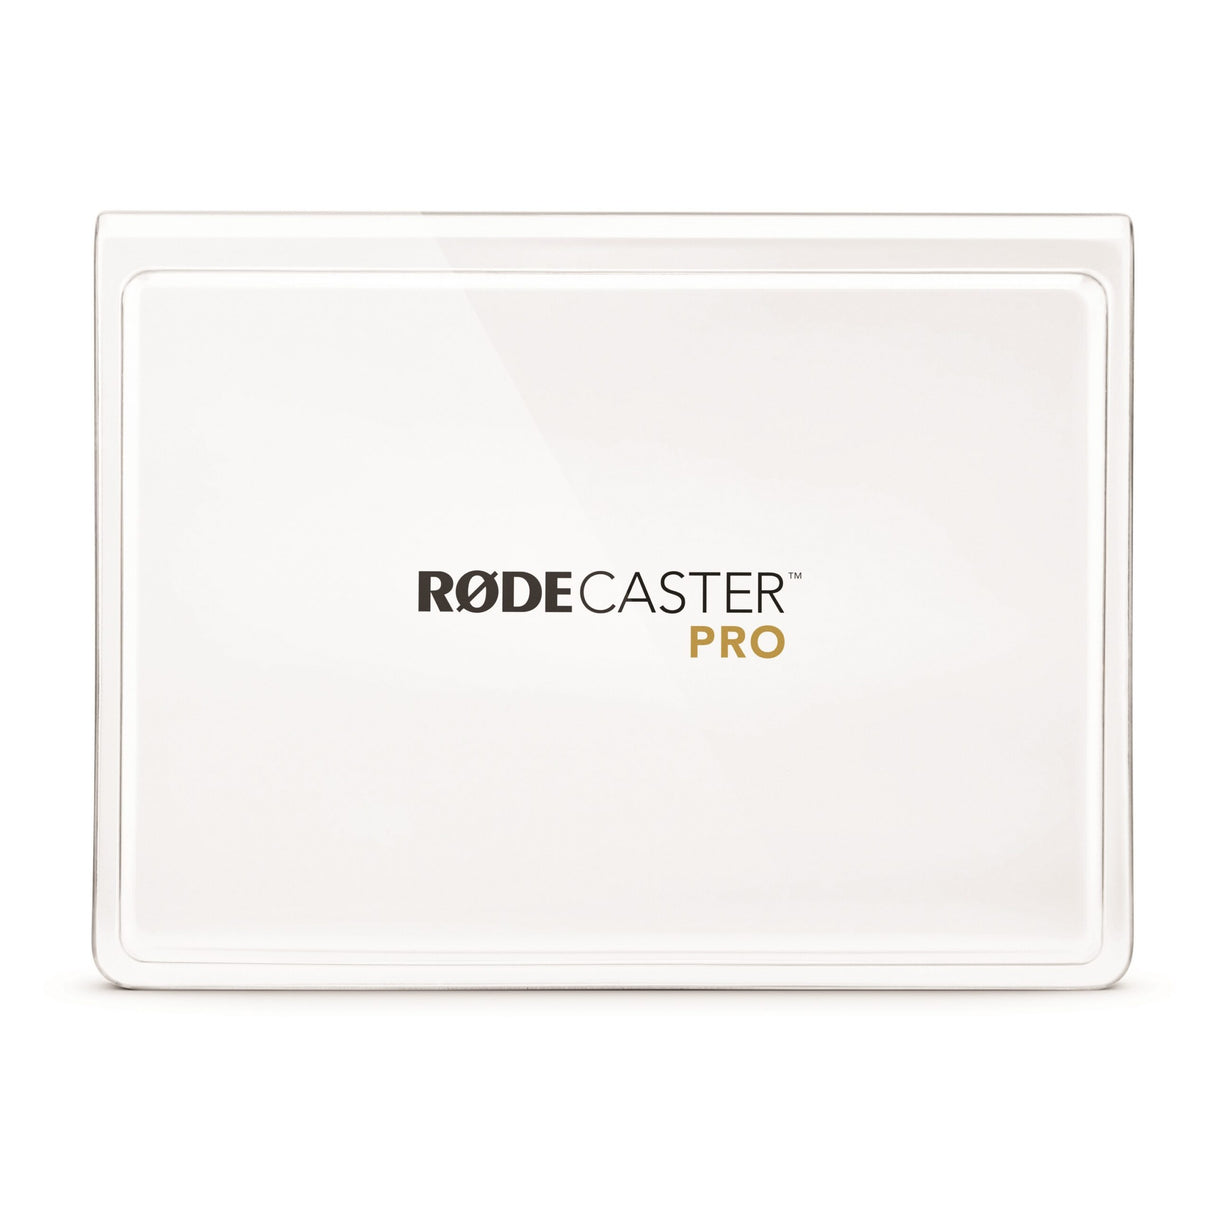 Rode RODECover Pro Cover for RODECaster Pro